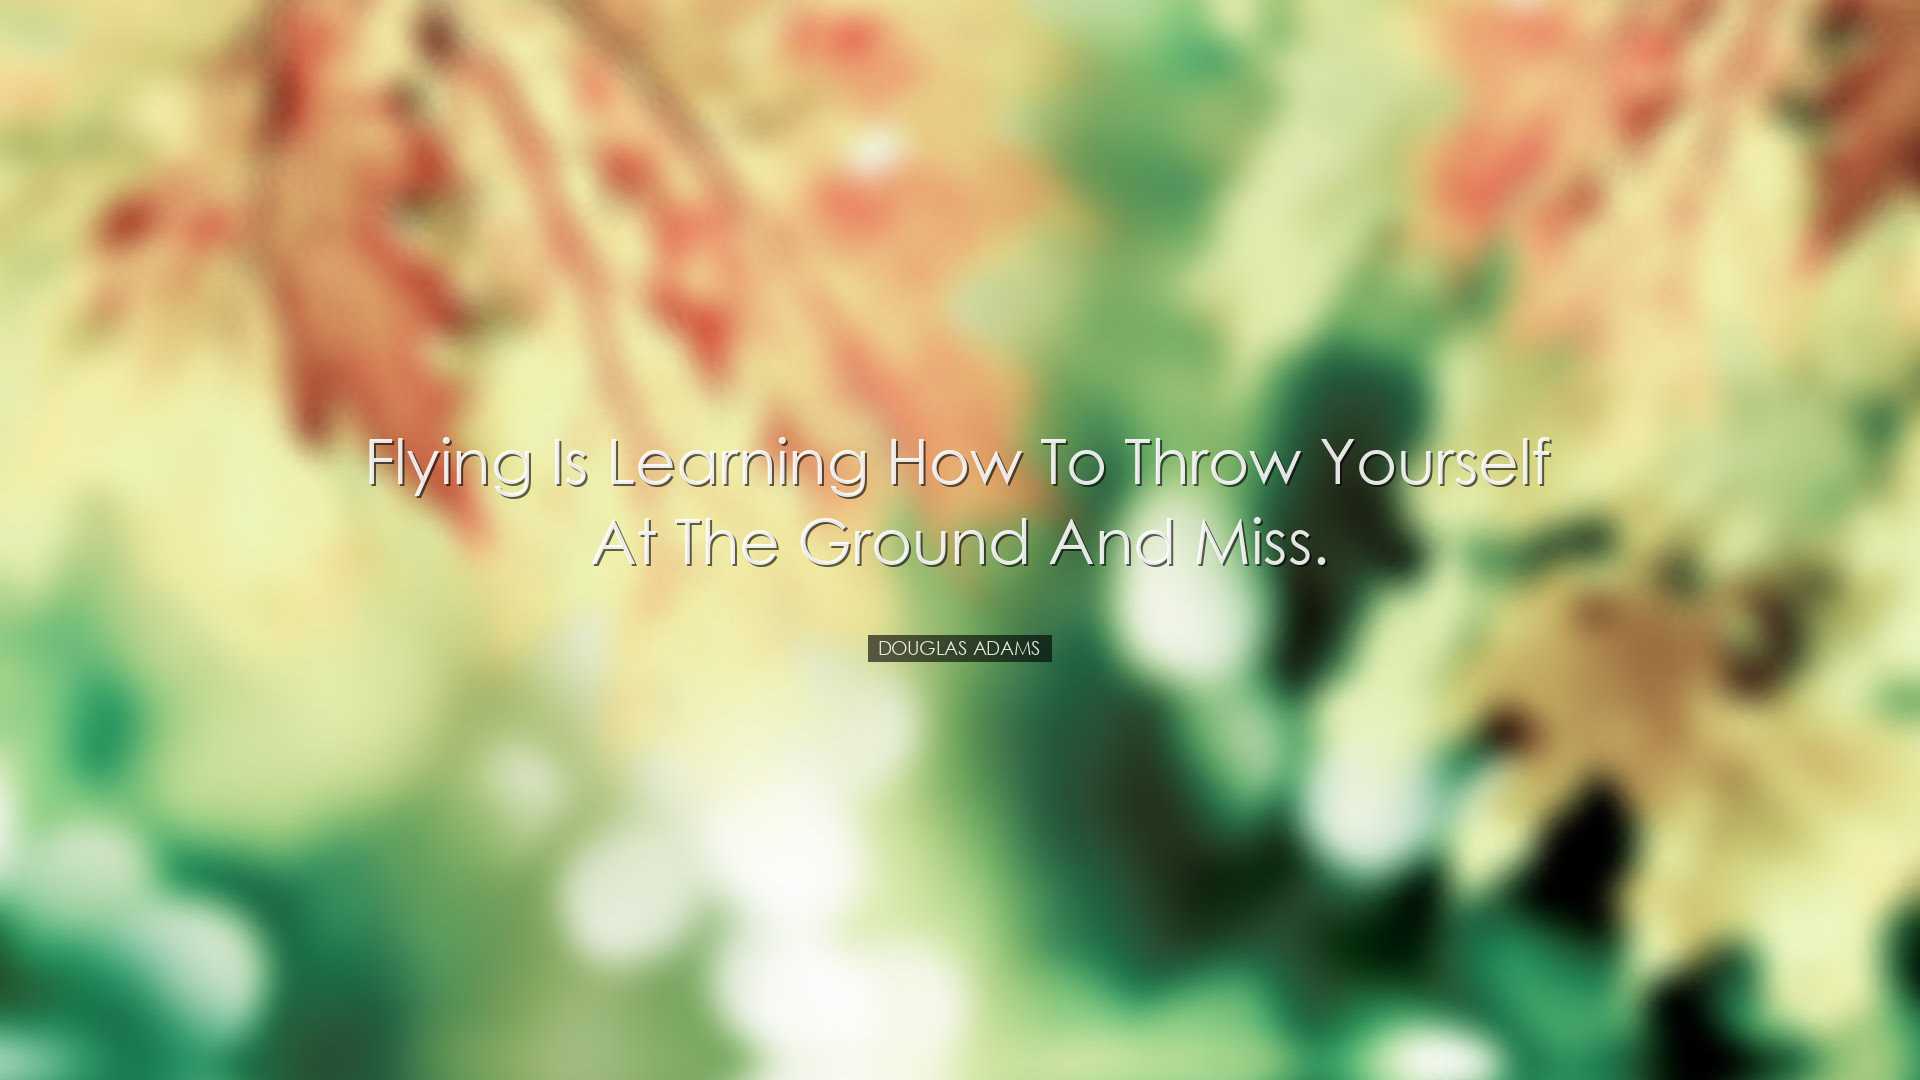 Flying is learning how to throw yourself at the ground and miss. -